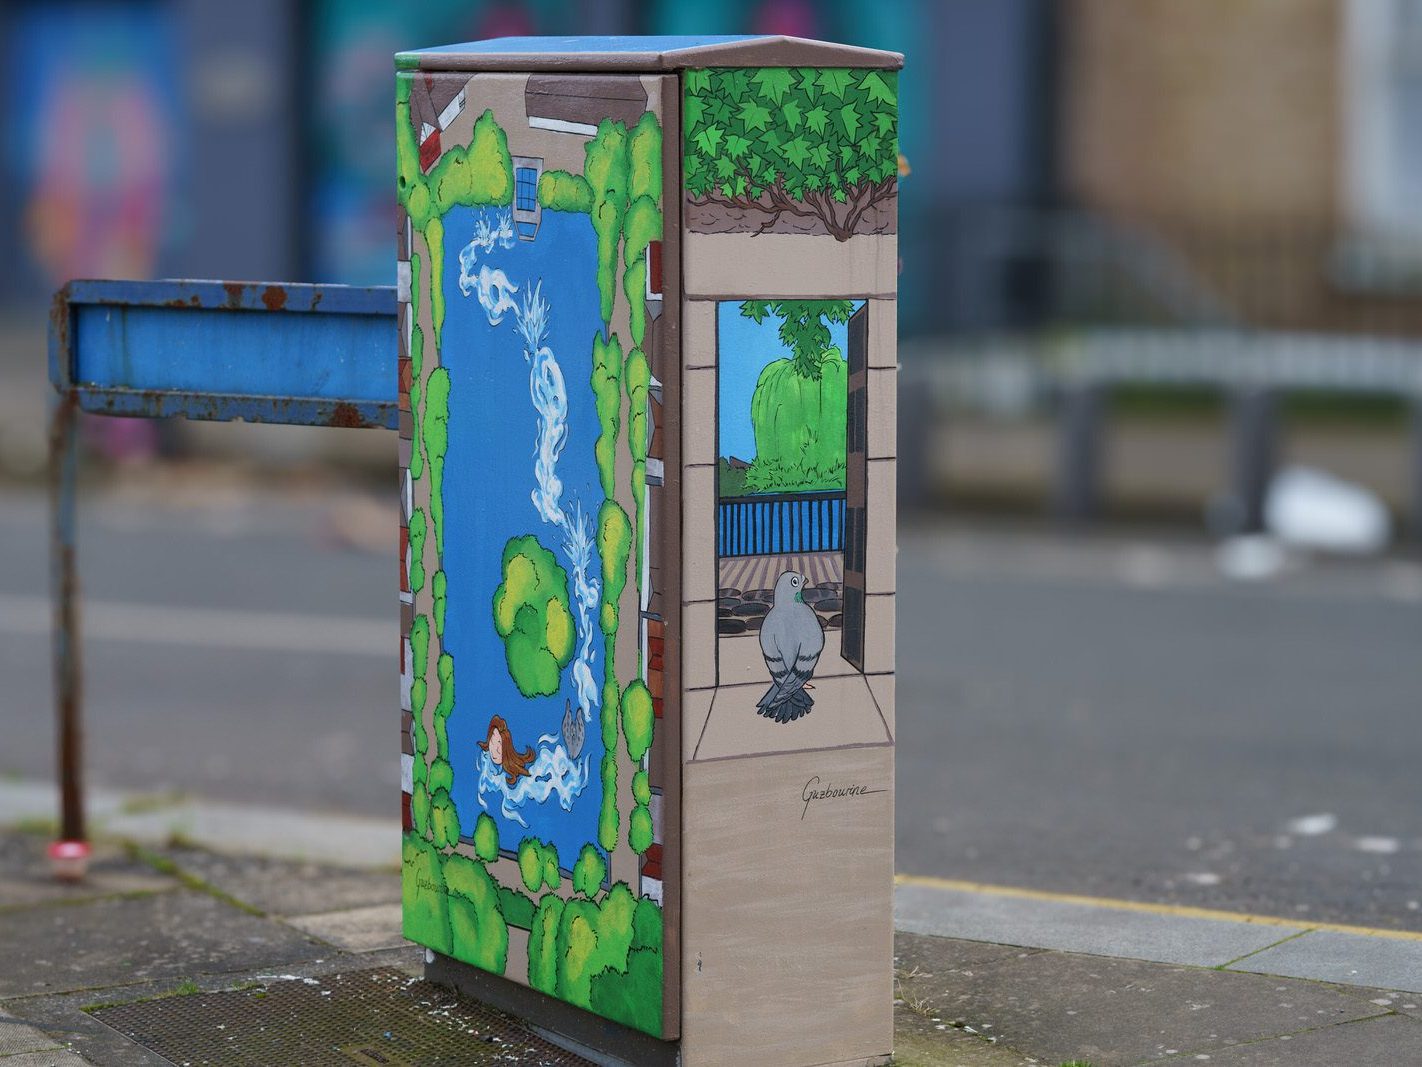 THE BASIN BY LAURA AND CHRISTINA [PAINT-A-BOX STREET ART]-228847-1